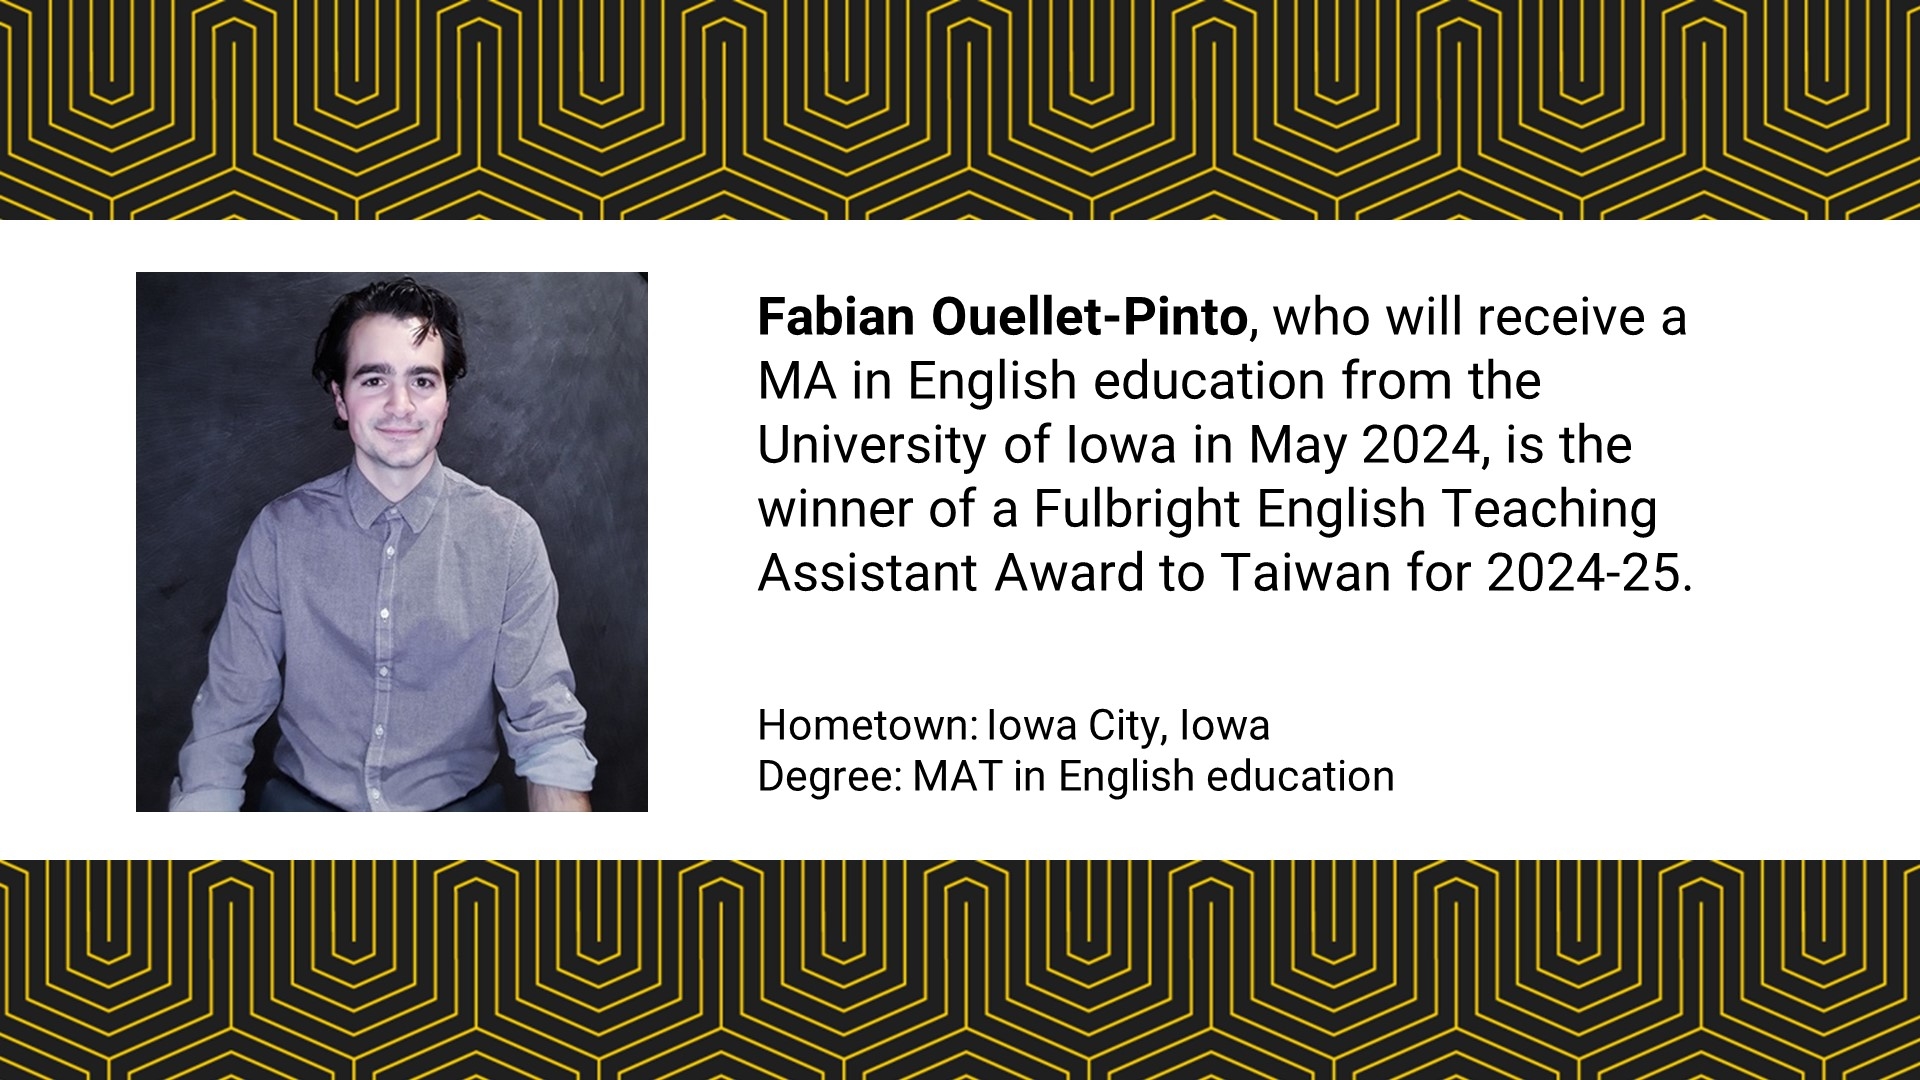 Fabian Ouellet-Pinto, who will receive a MA in English education from the University of Iowa in May 2024, is the winner of a Fulbright English Teaching Assistant Award to Taiwan for 2024-25. 